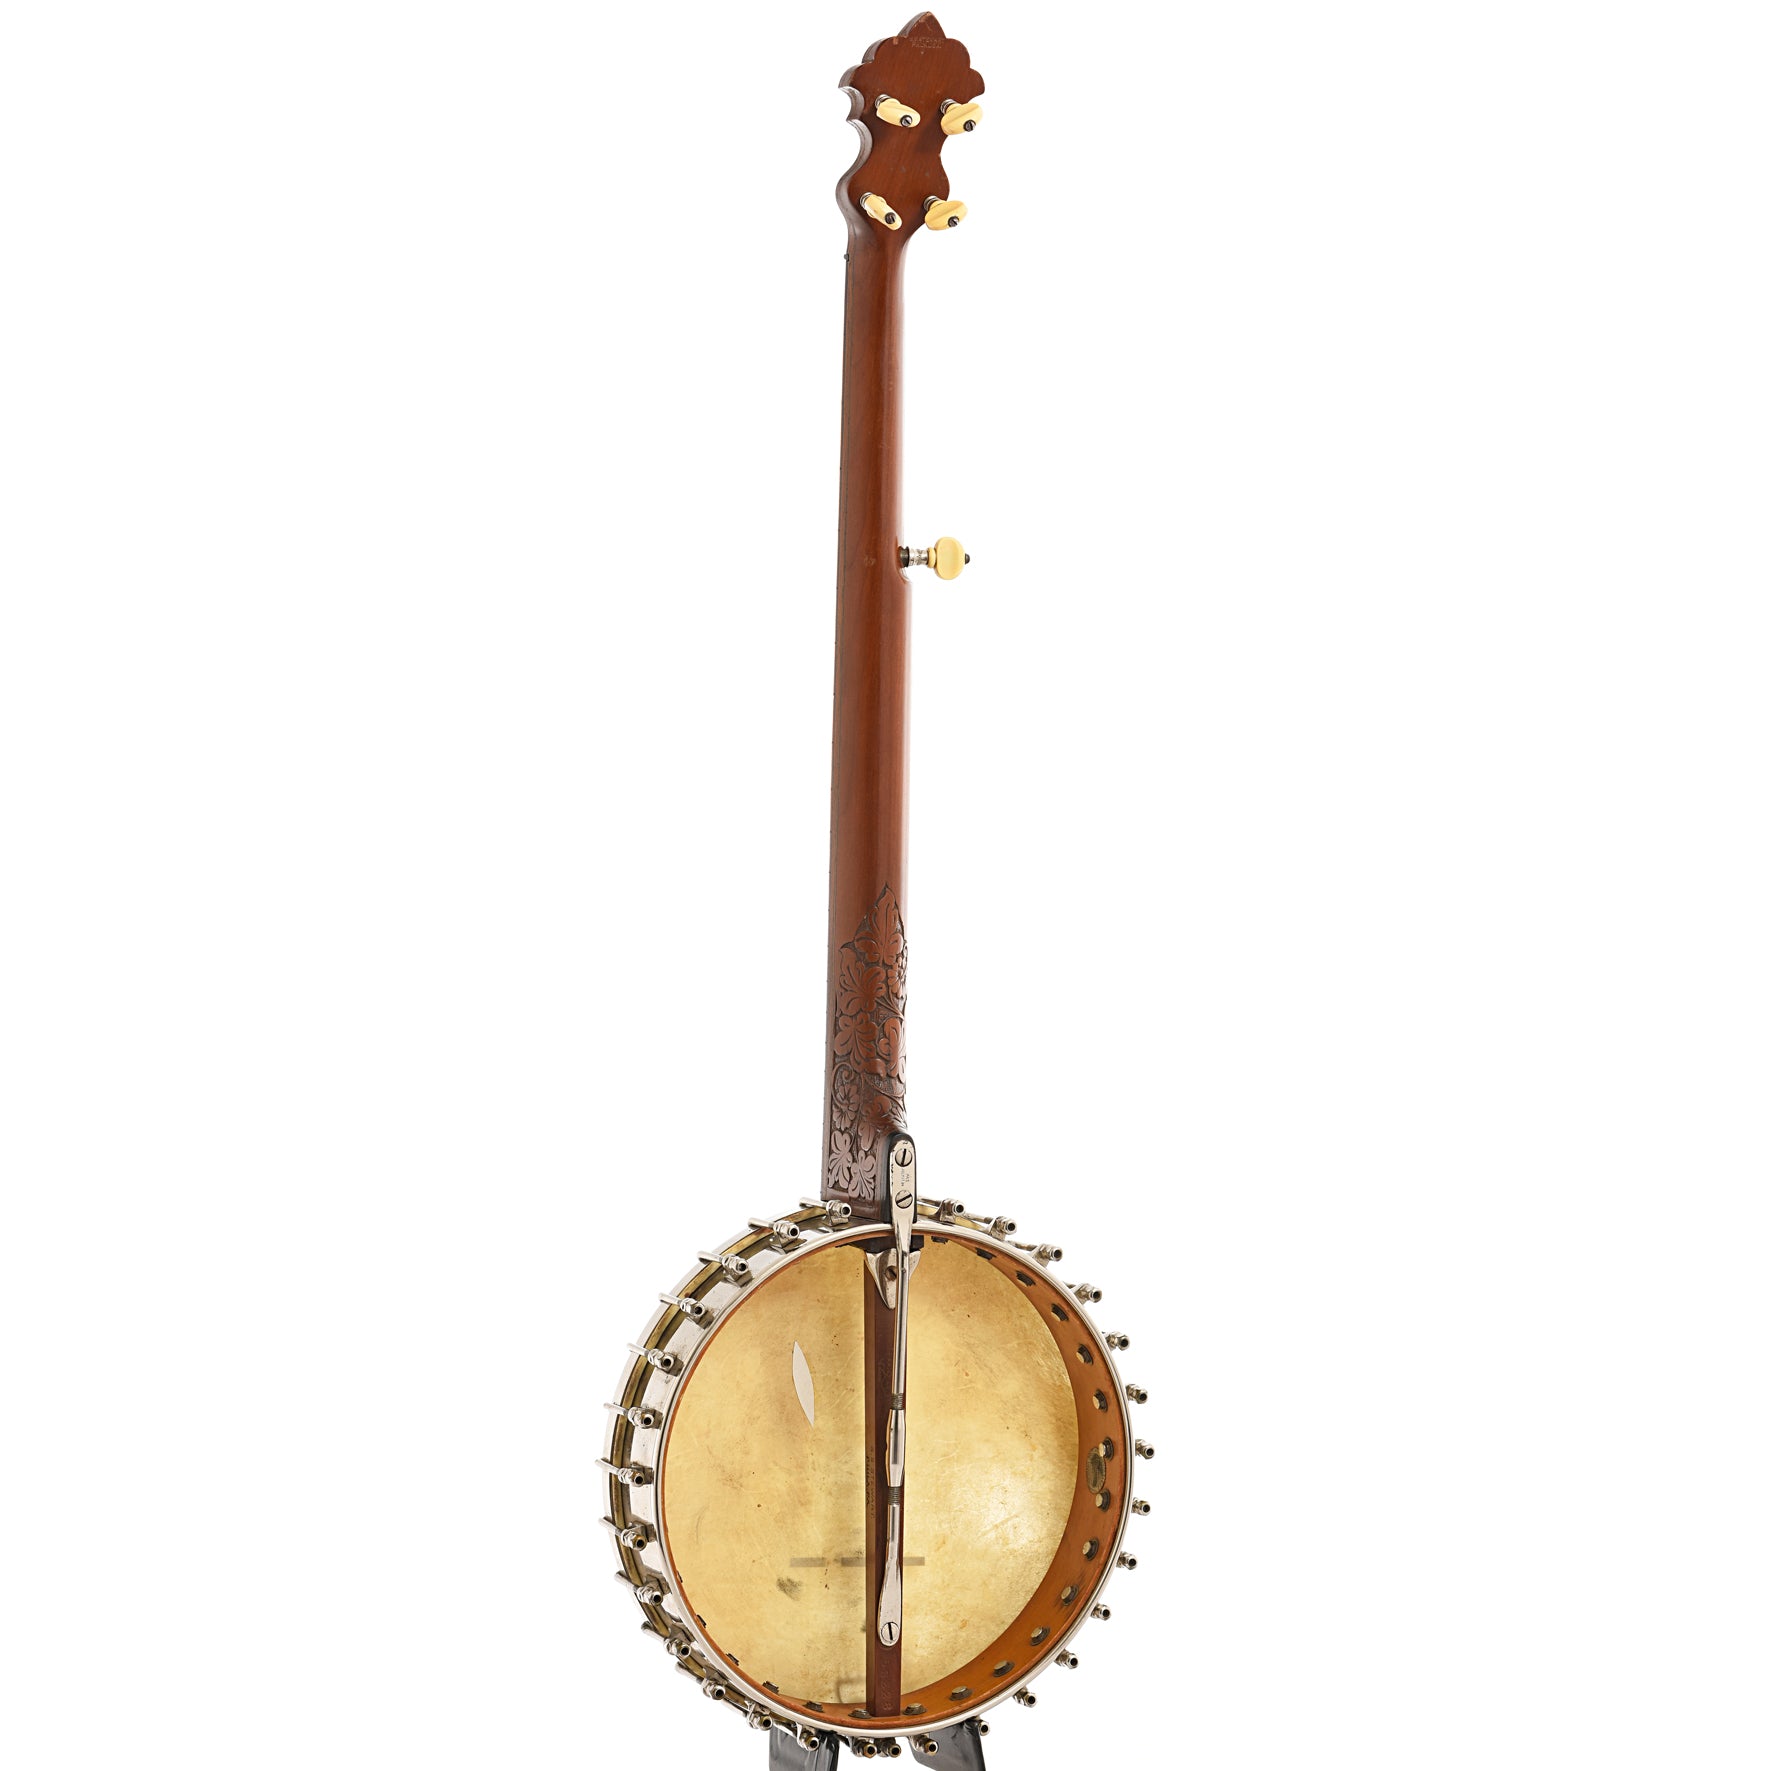 Full back and side of S.S. Stewart Special Thoroughbred Open Back Banjo (c.1890)